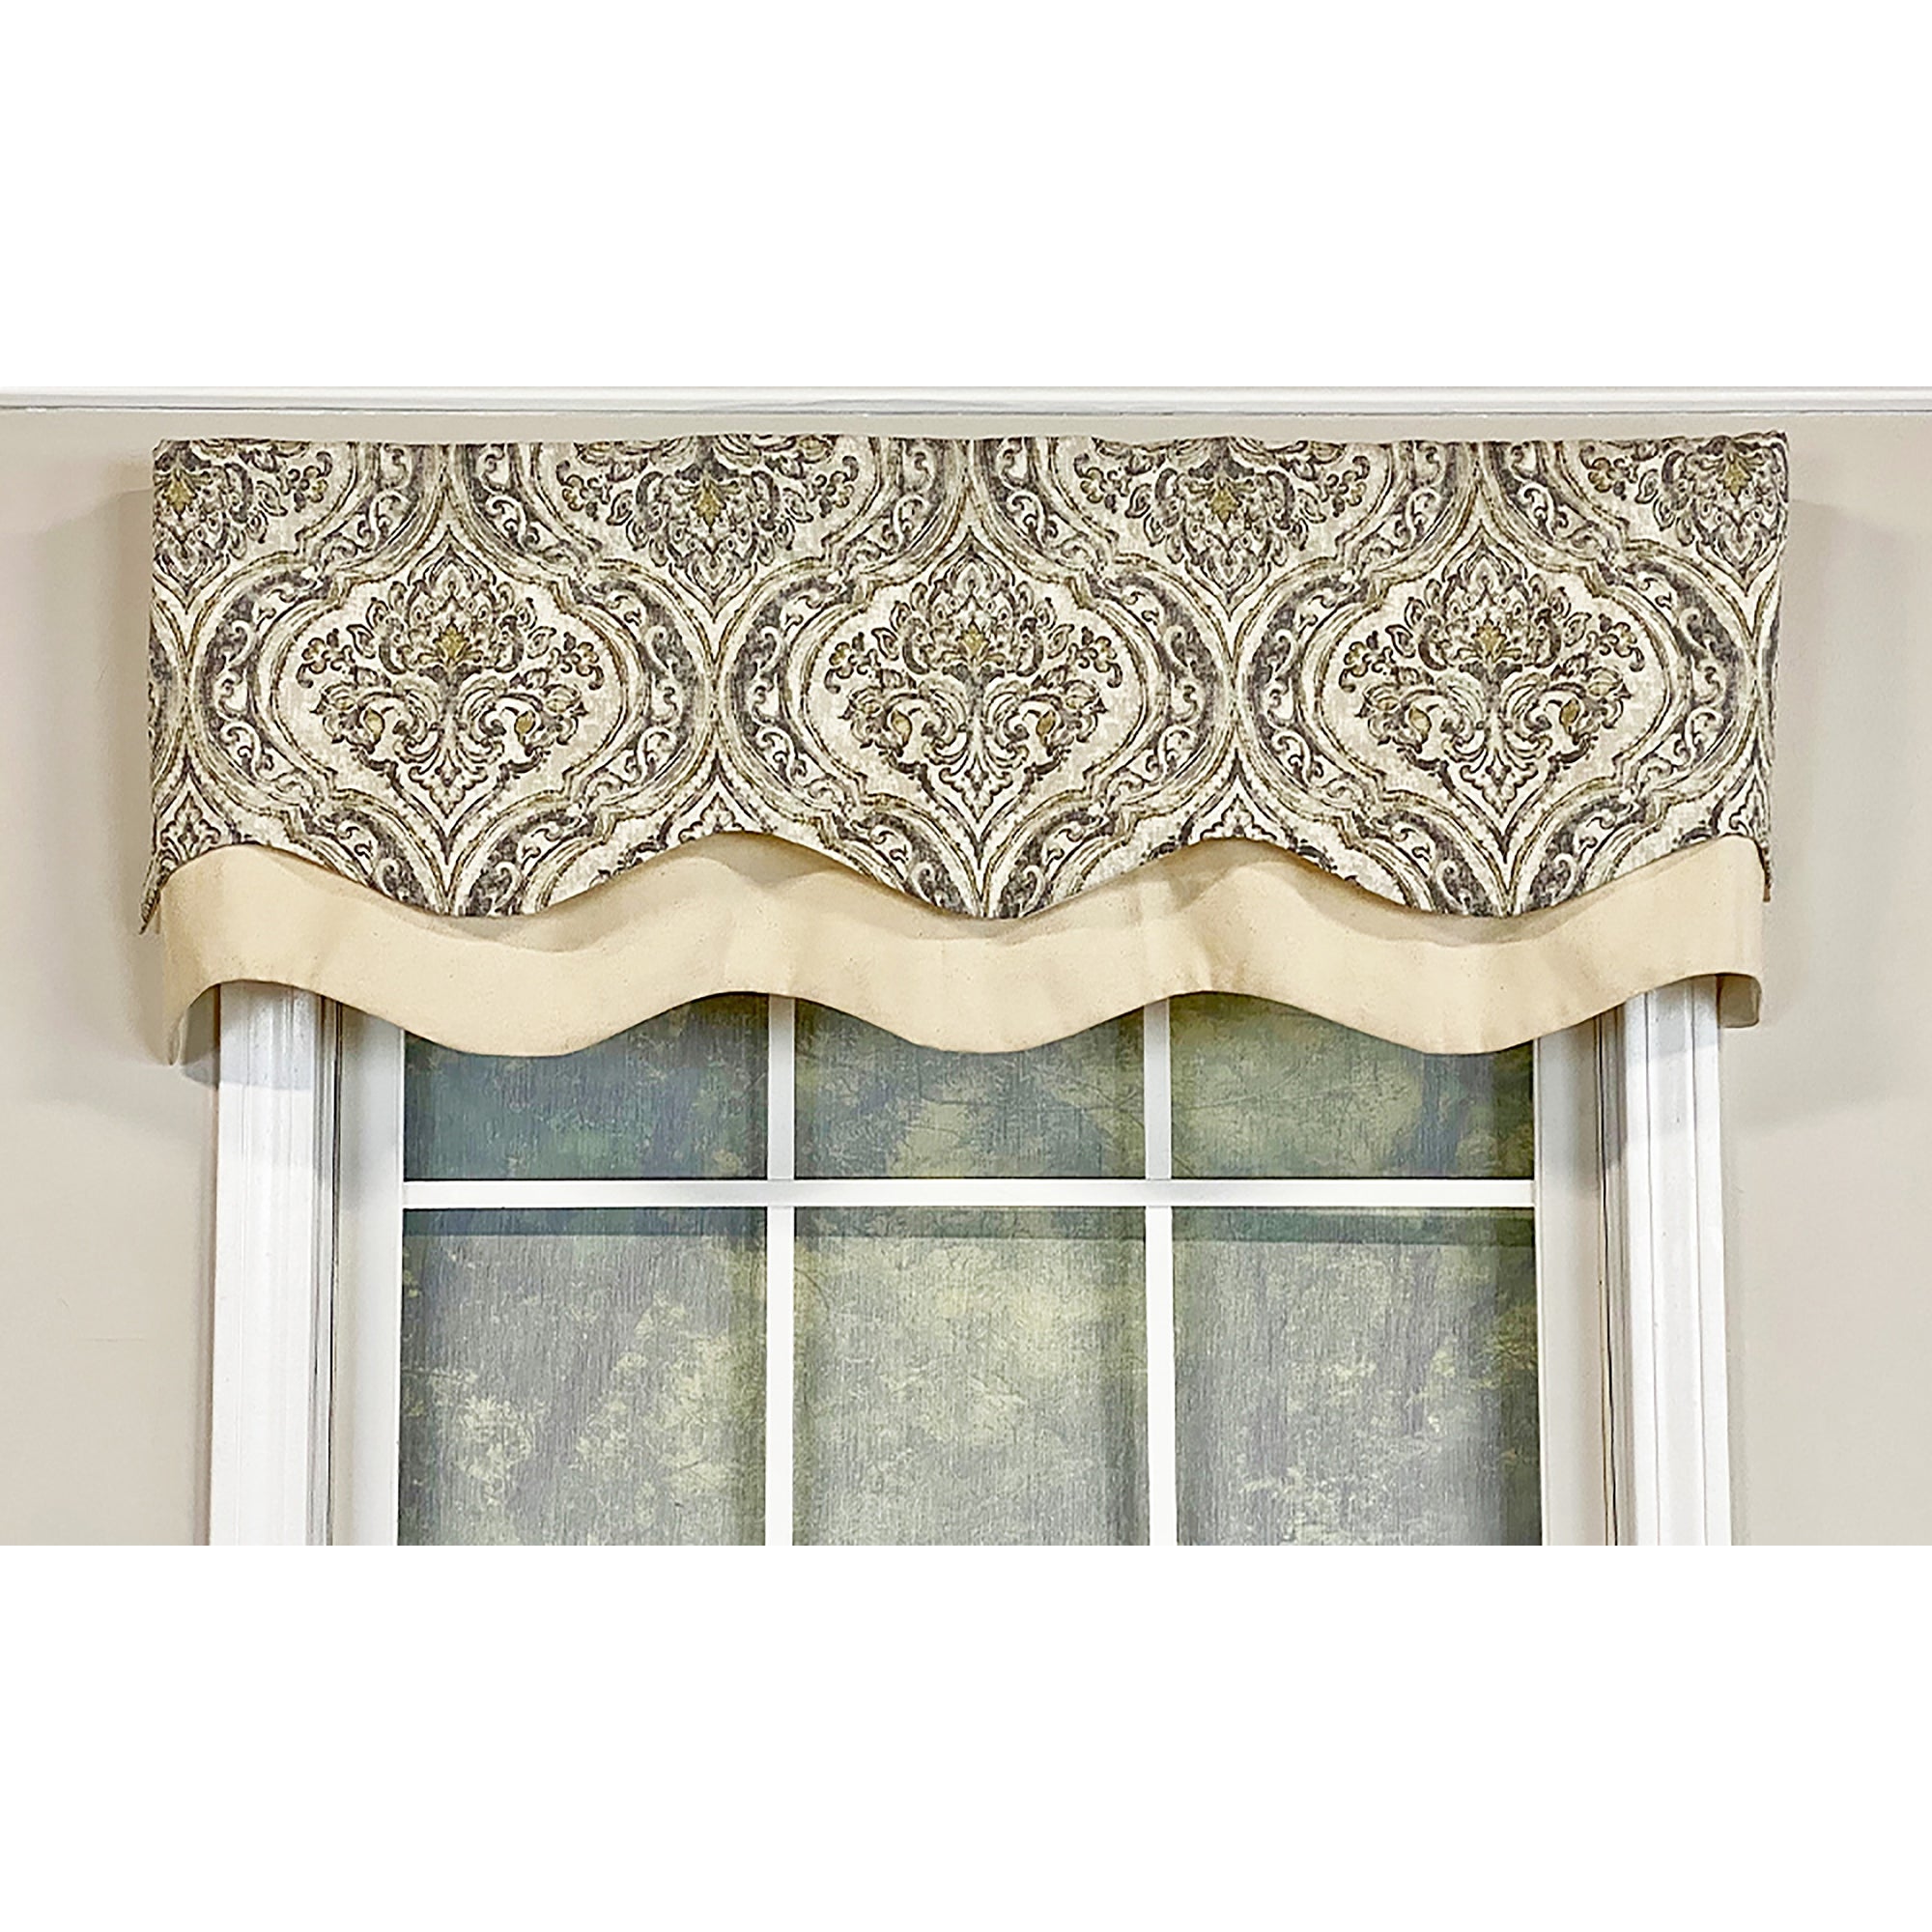 Diamond Damask Glory Window Valance 3in Rod Pocket Layered 50in x 16in by RLF Home